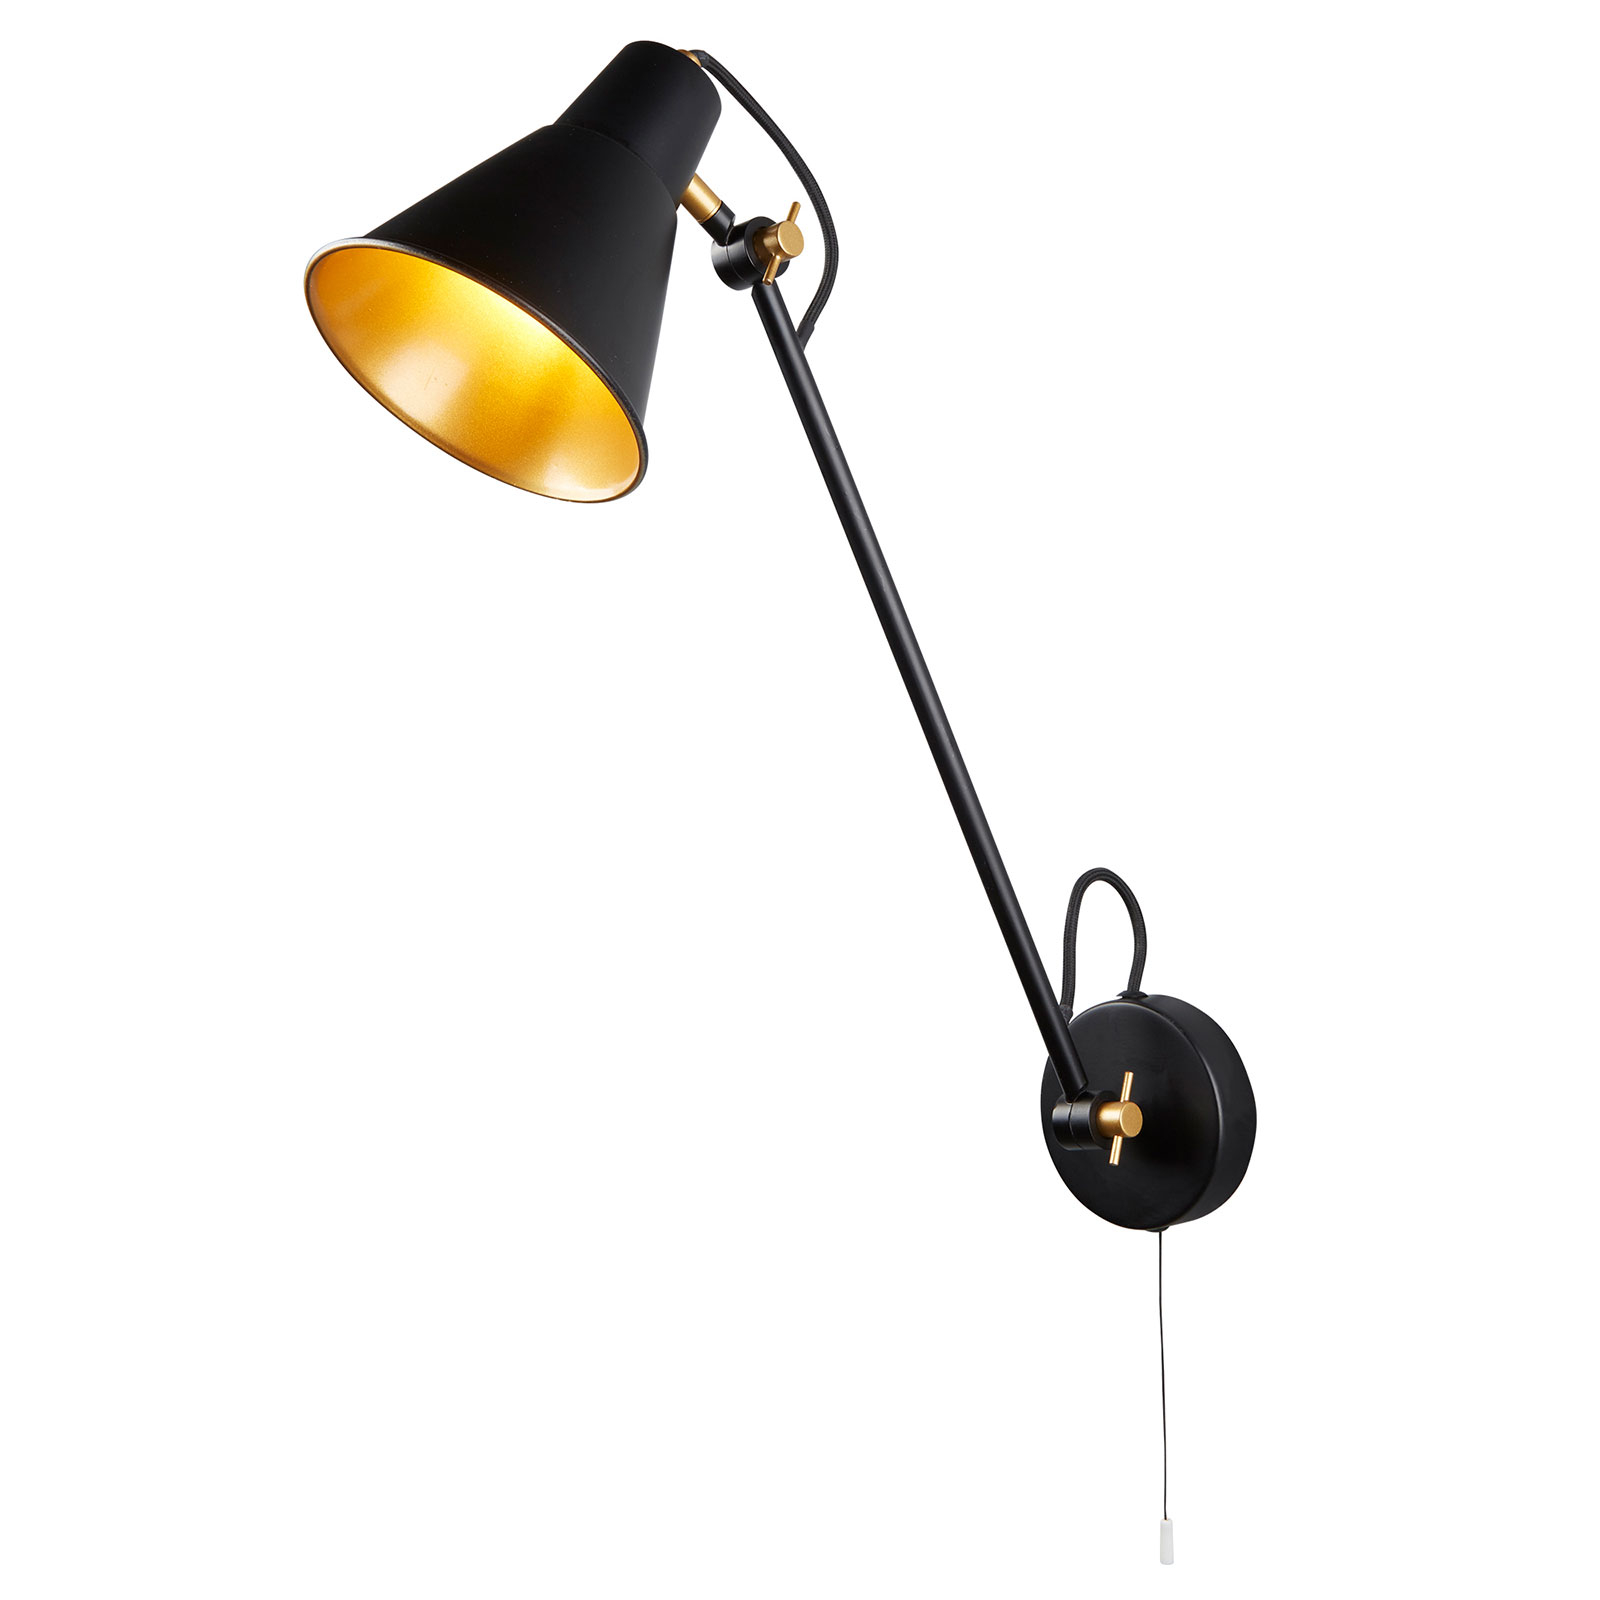 6302 wall lamp made of metal, black and gold